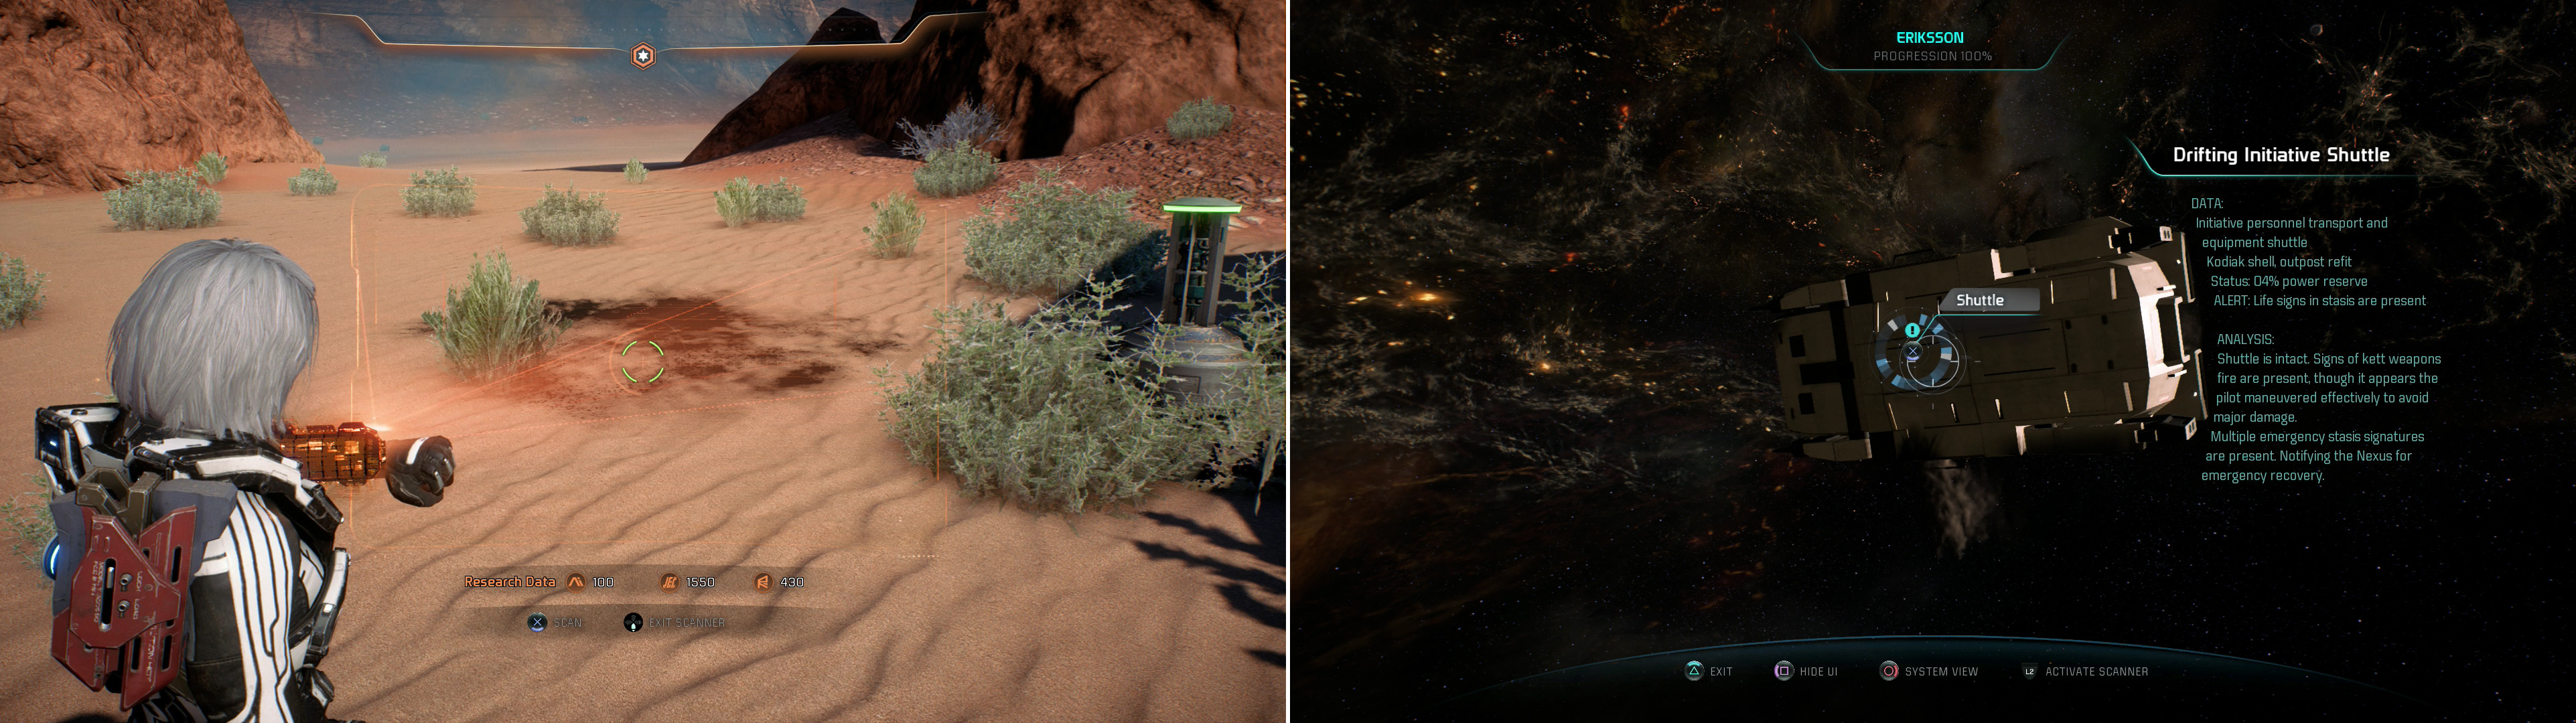 Scan the Shuttle Burn Marks at various navpoint-marked "muster sites" (left) then track down some surviving colonists in the Eriksson System (right).